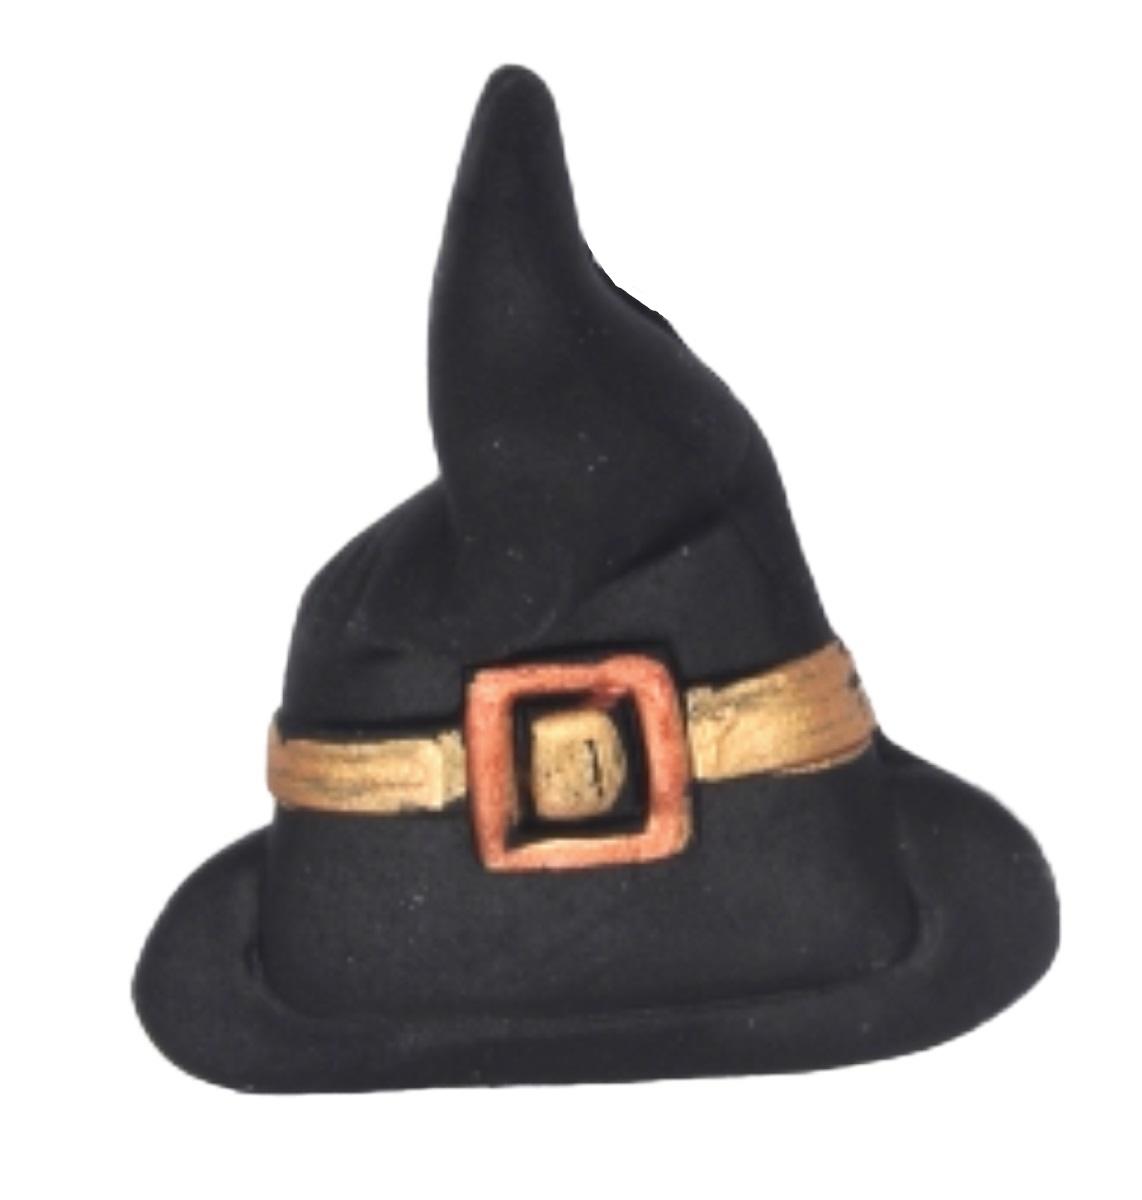 Great Halloween Witches hat Trick or Treat Vegan Cake Decorations